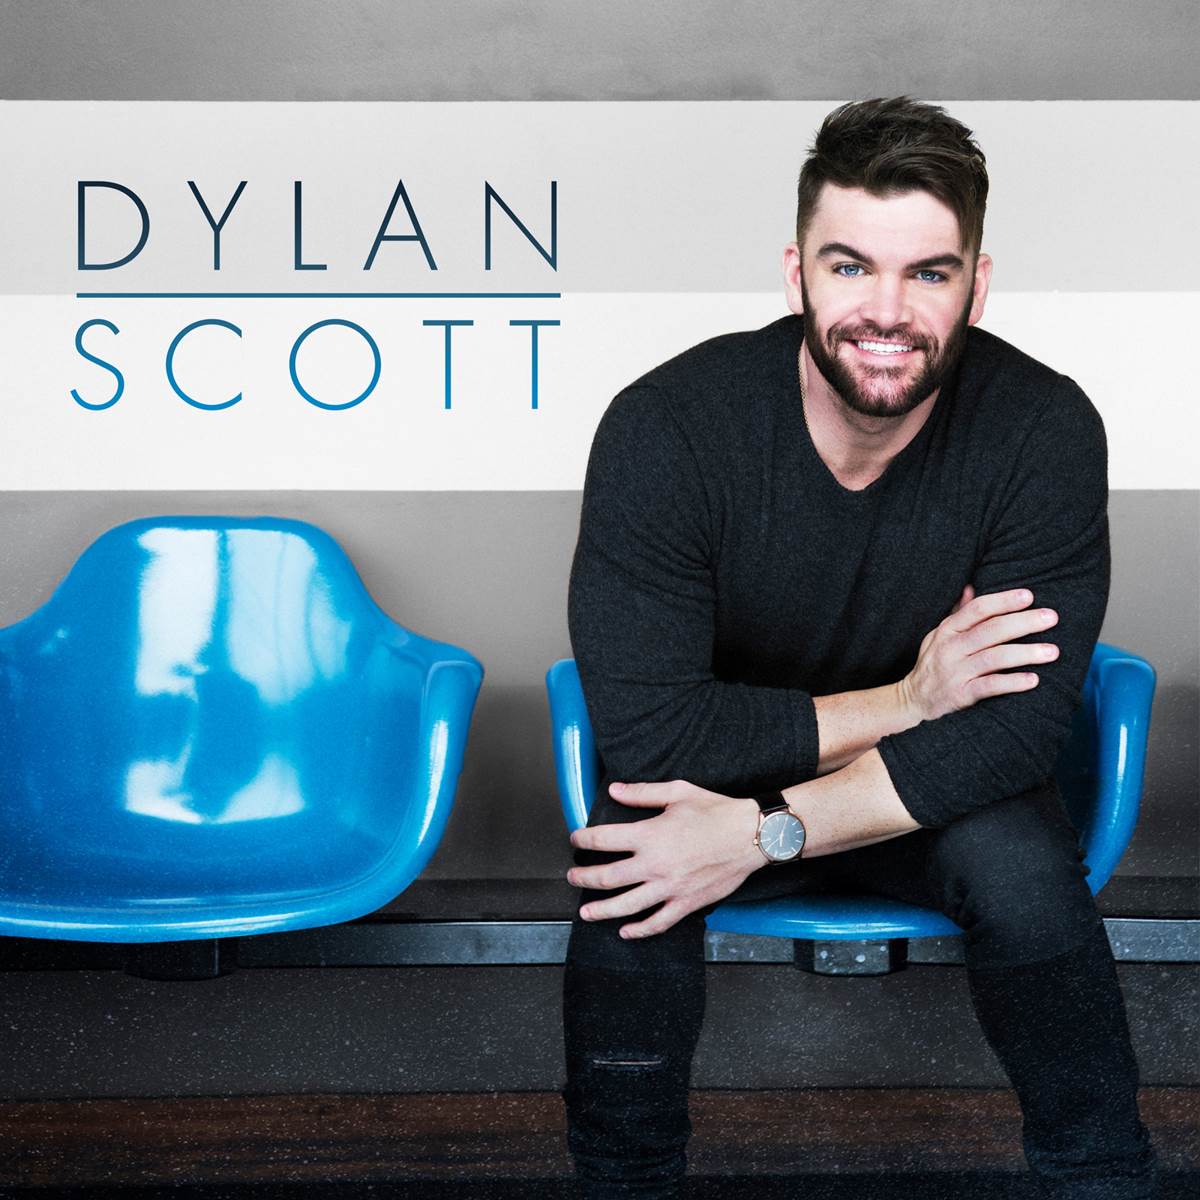 Dylan Scott Releases Debut EP "Dylan Scott" Country Music Pride